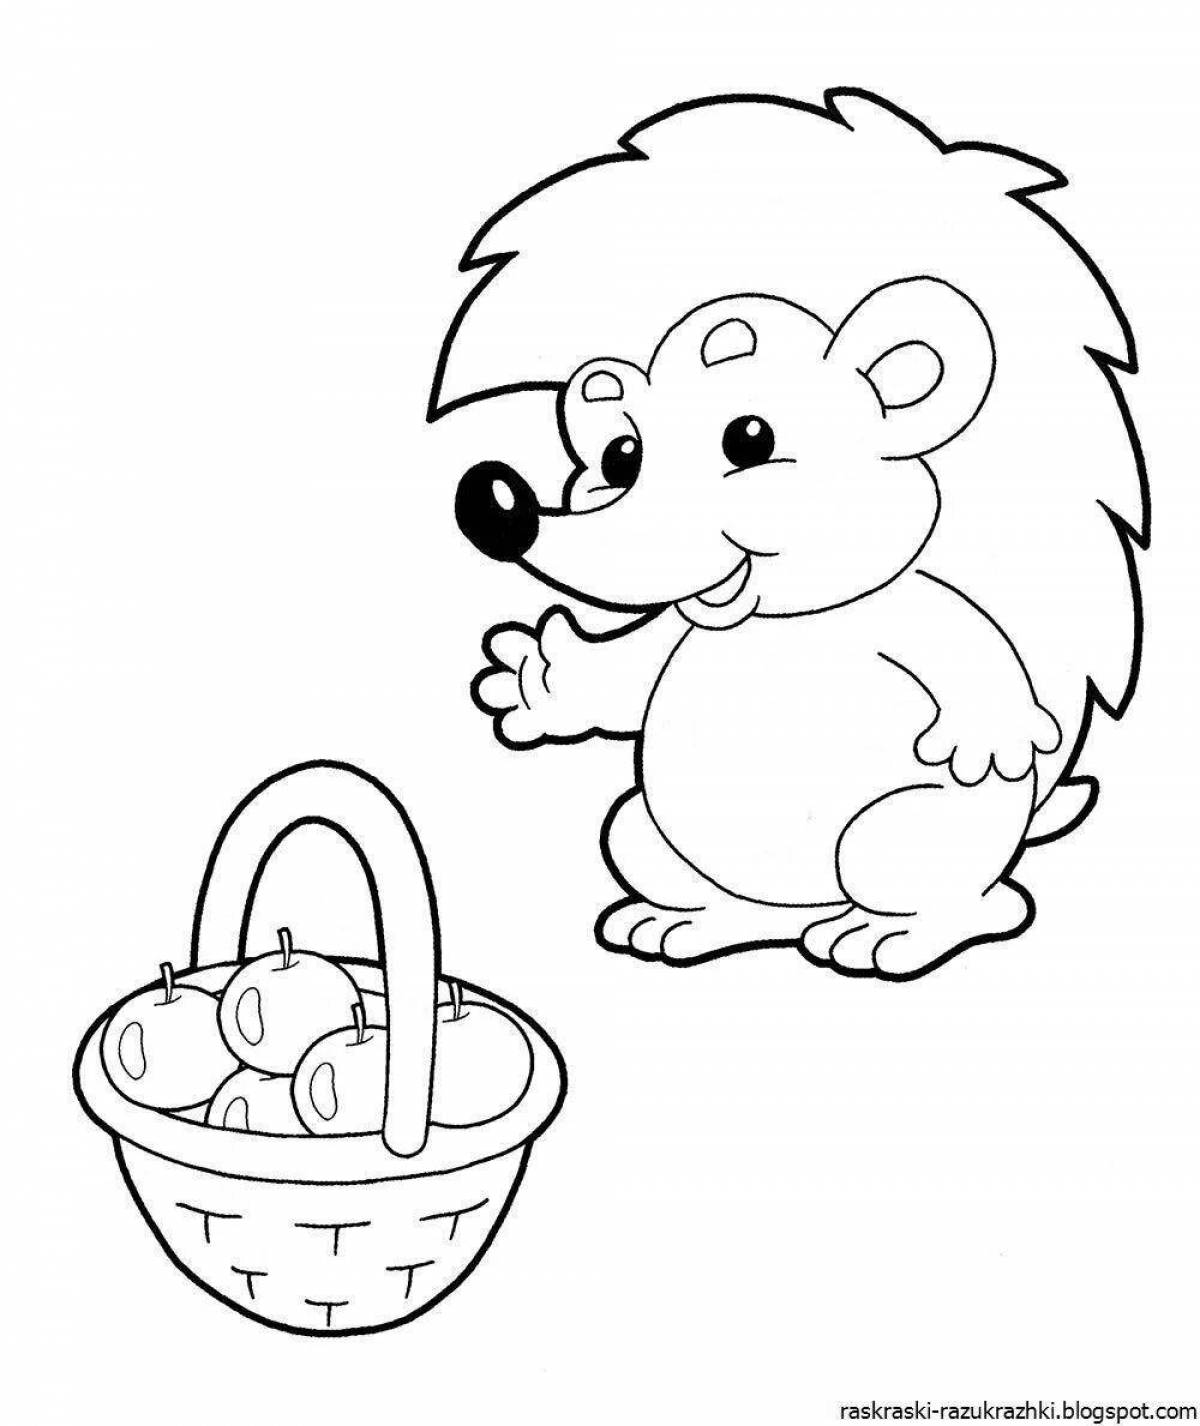 Creative coloring pdf for the little ones